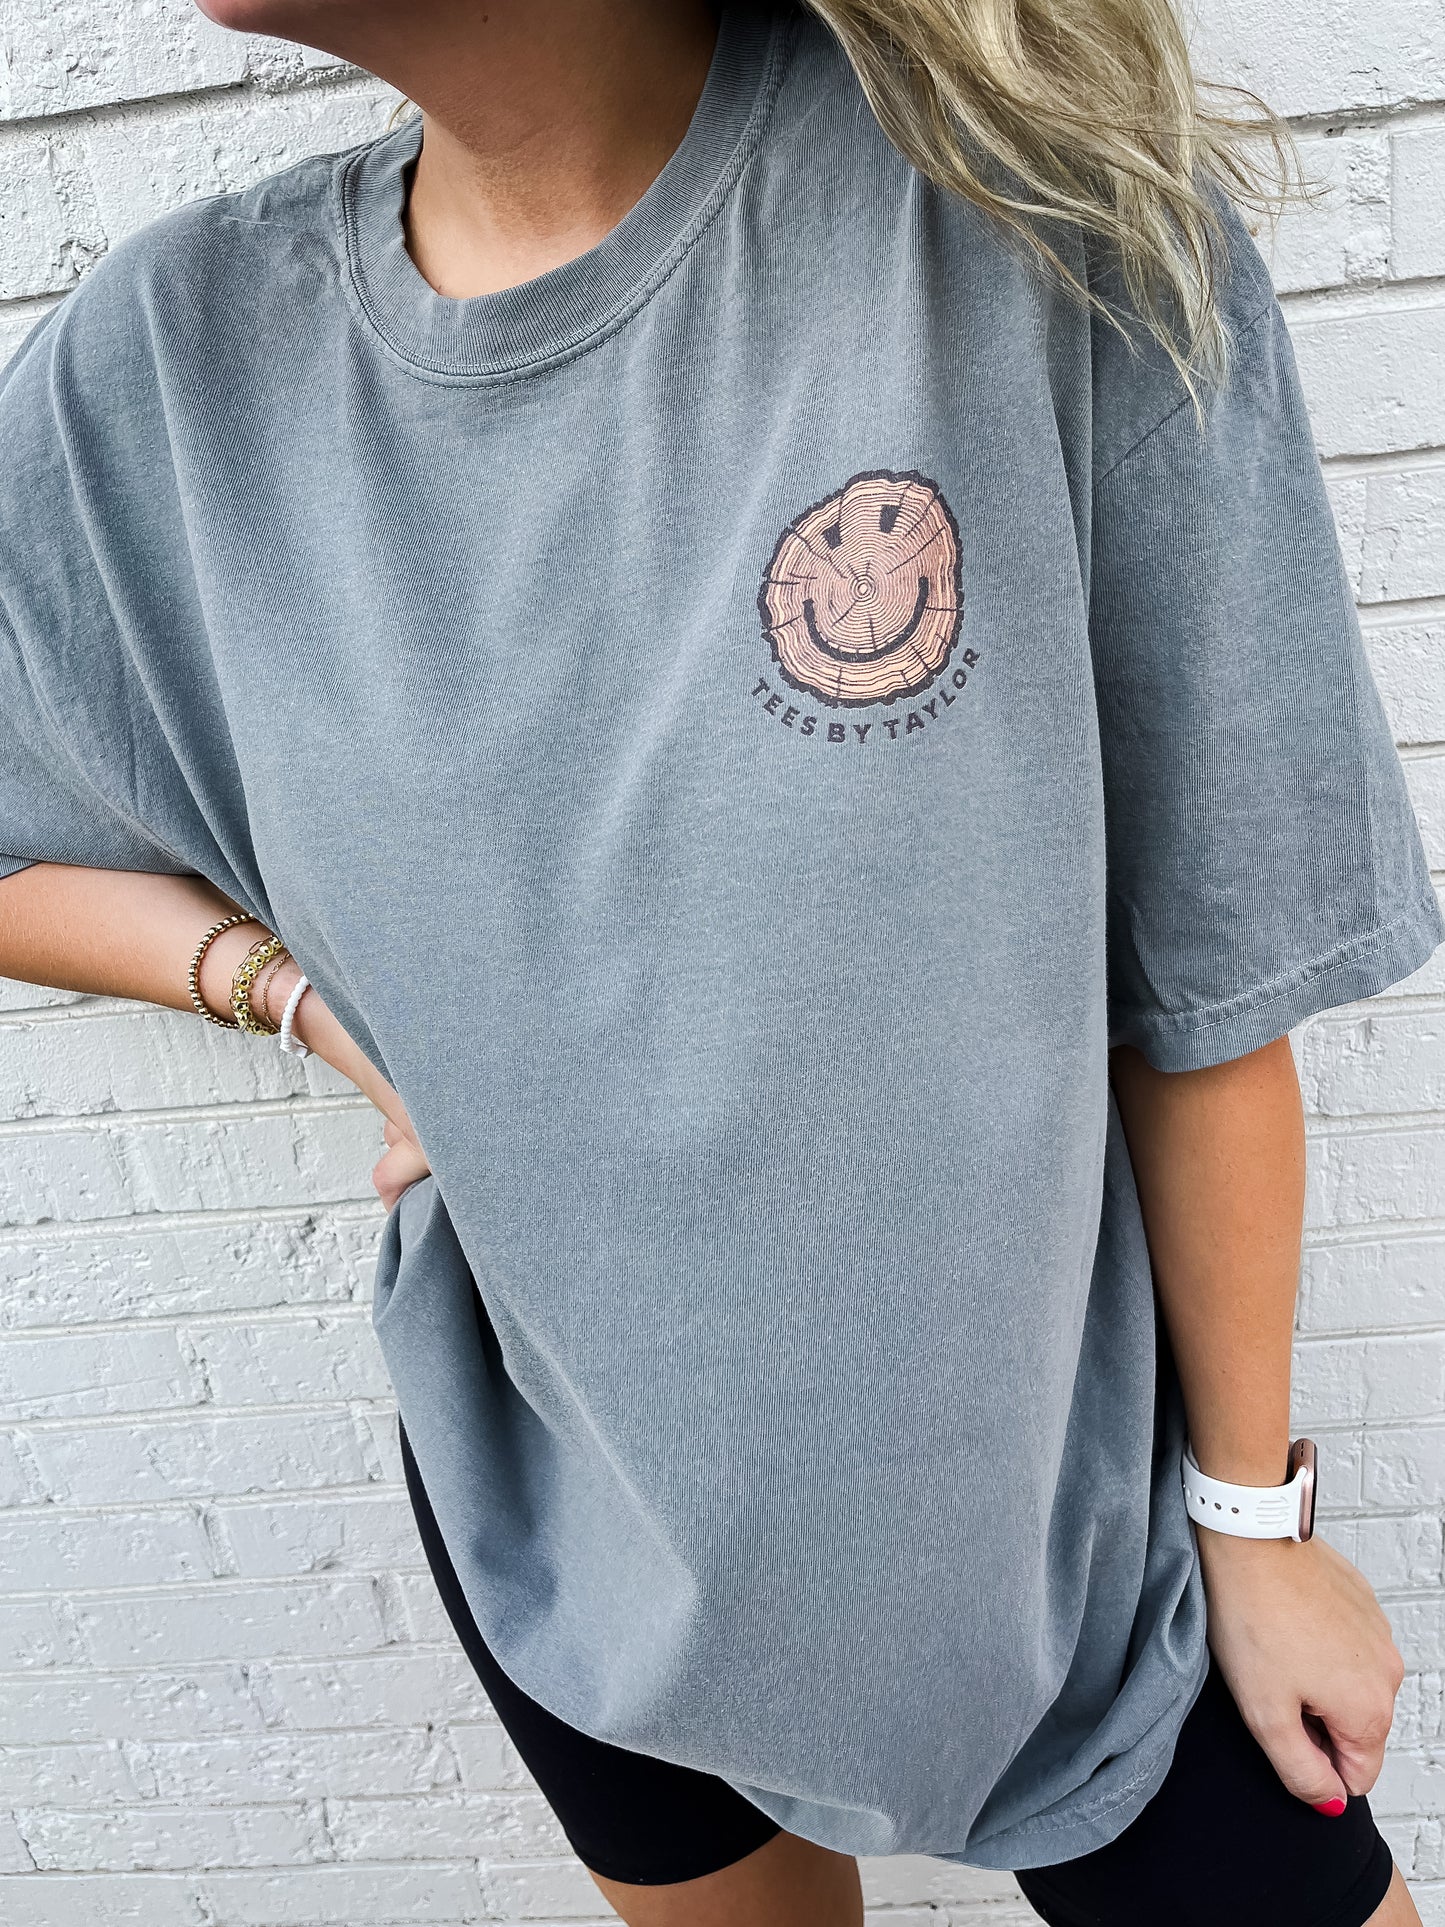 Take the Trails Smiley Tee